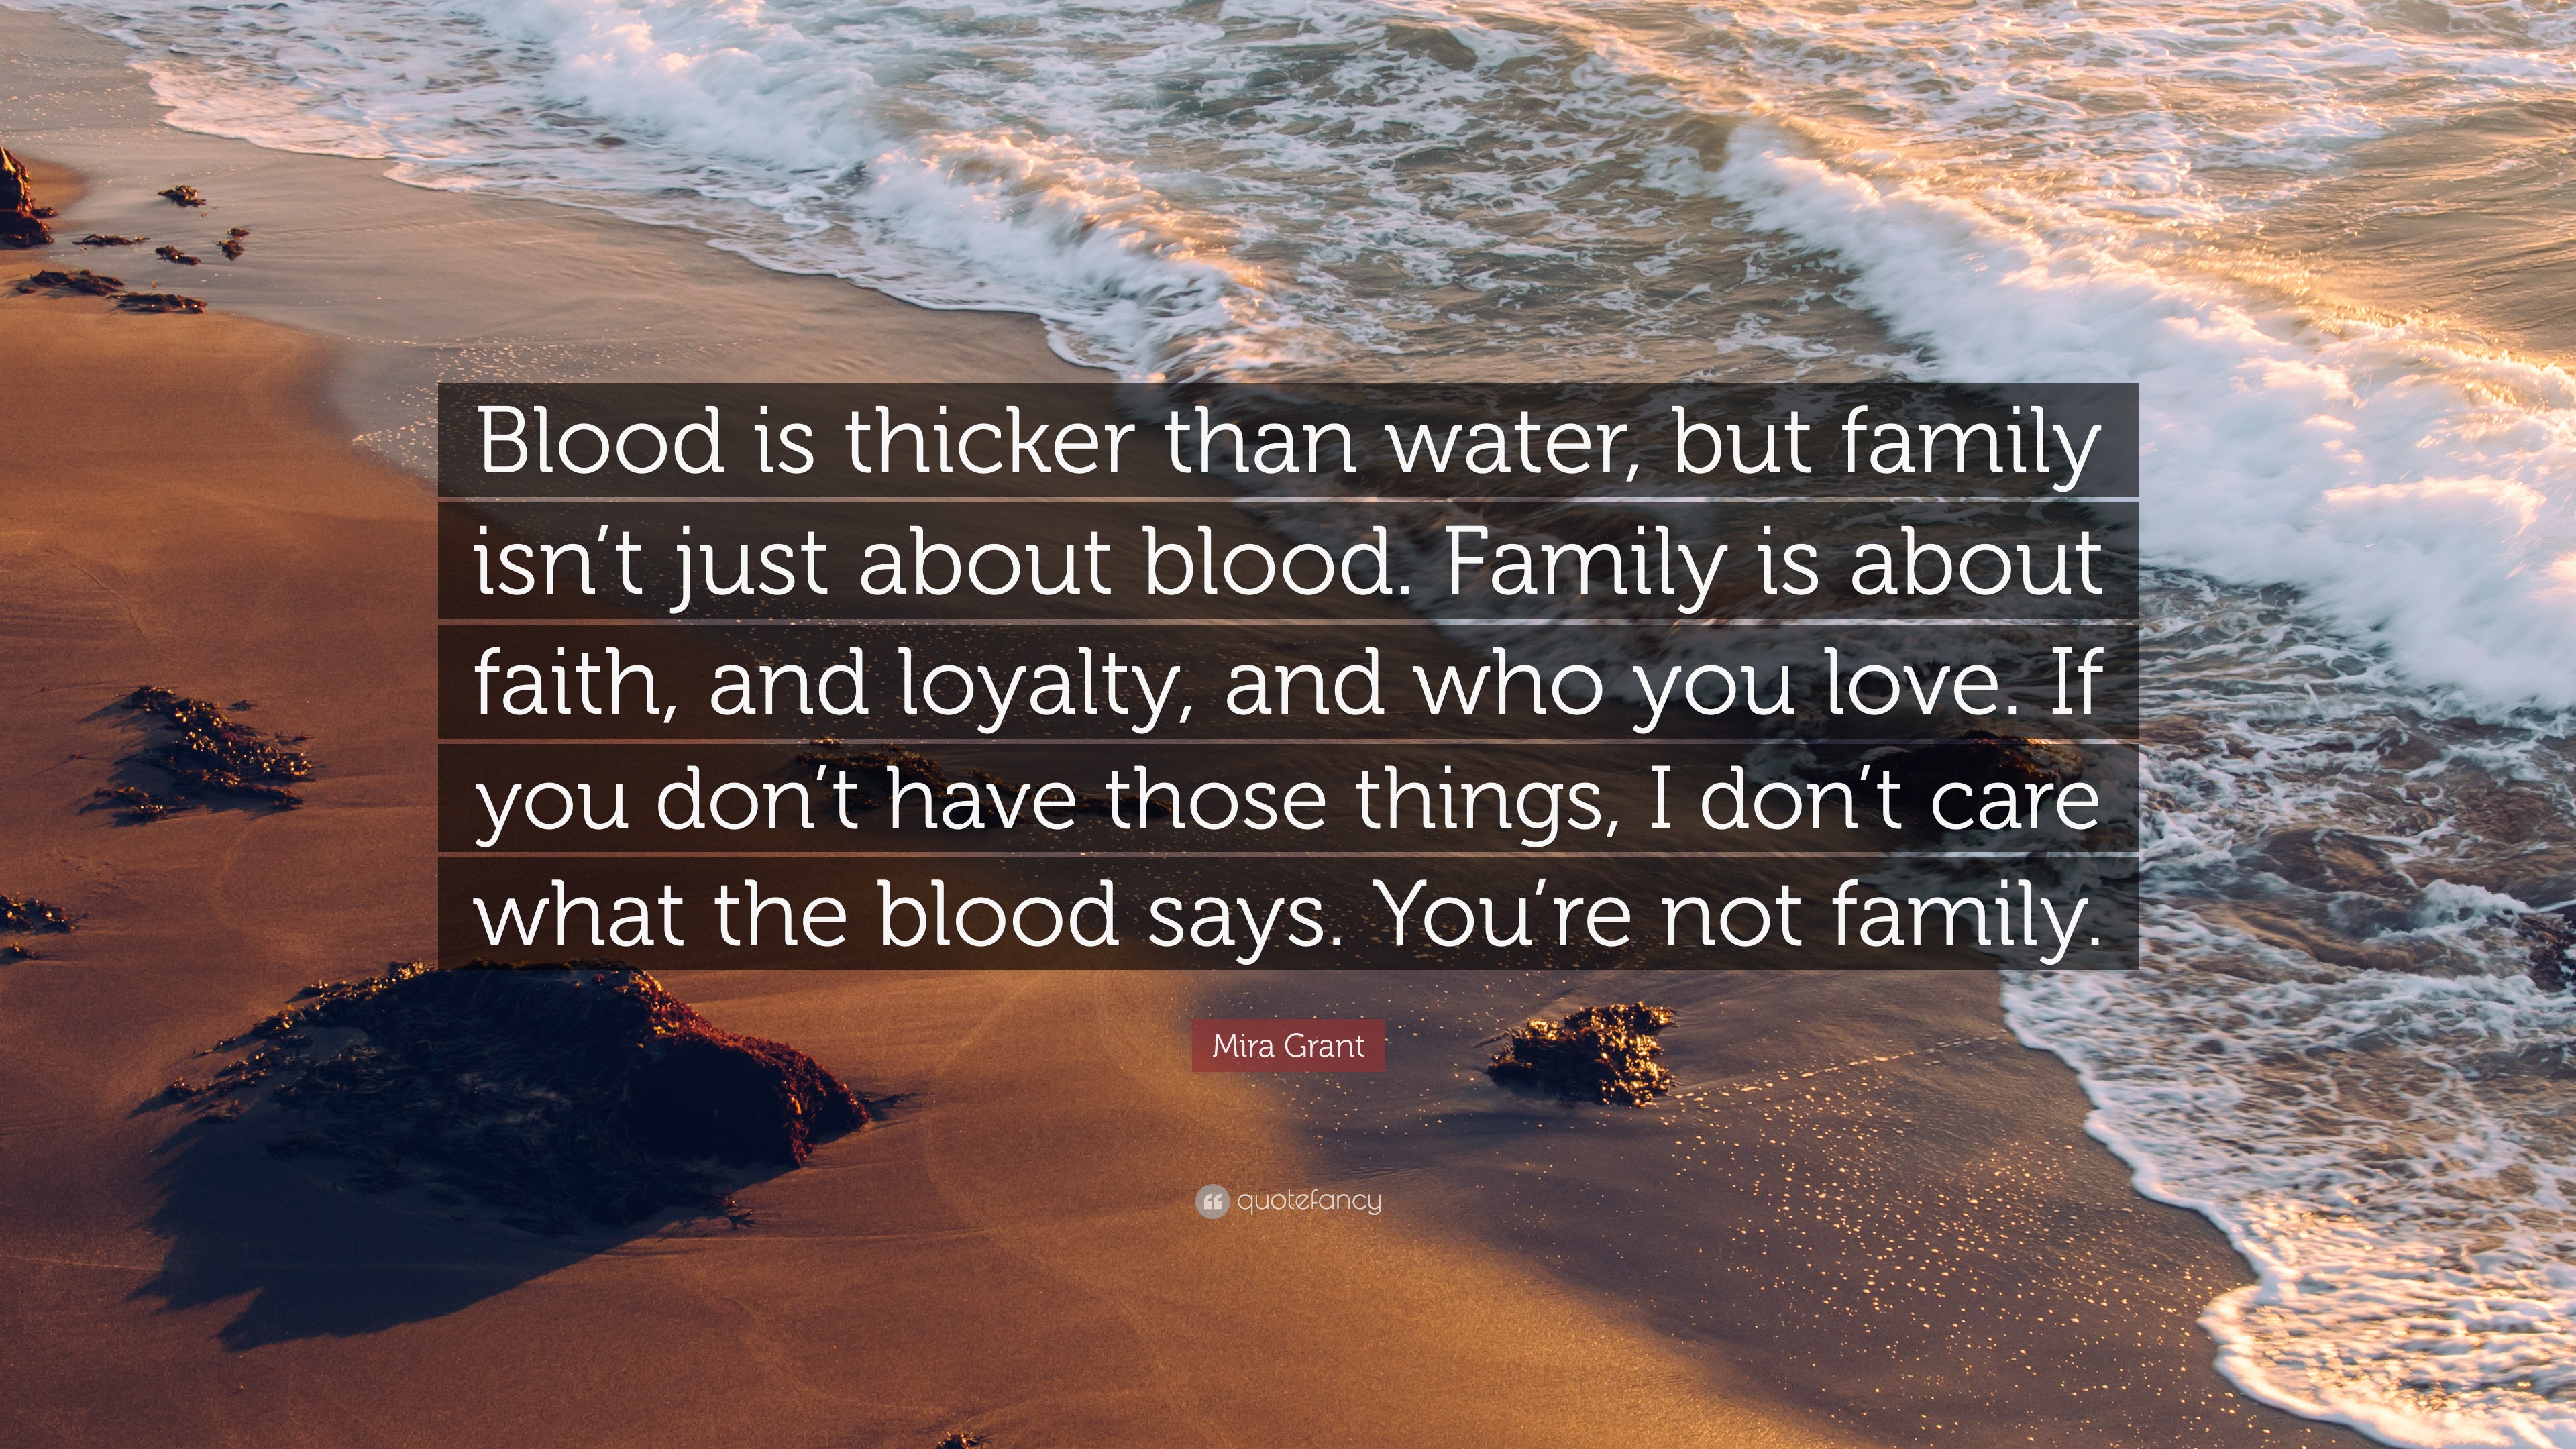 essay about blood is thicker than water